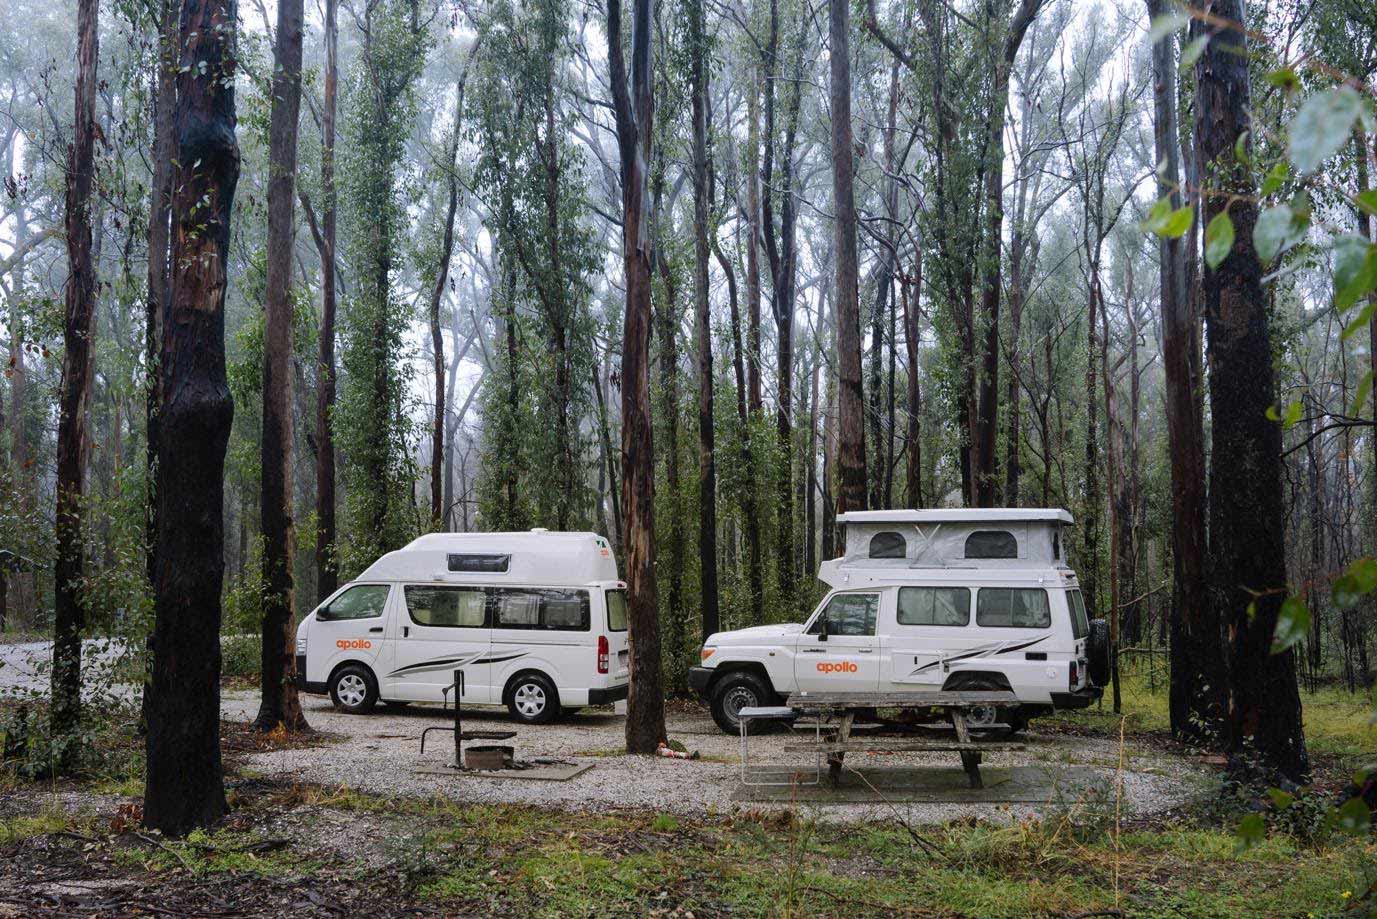 Apollo Hitop and Apollo Trailfinder Camper on a rainy day in Bald Rock National Park